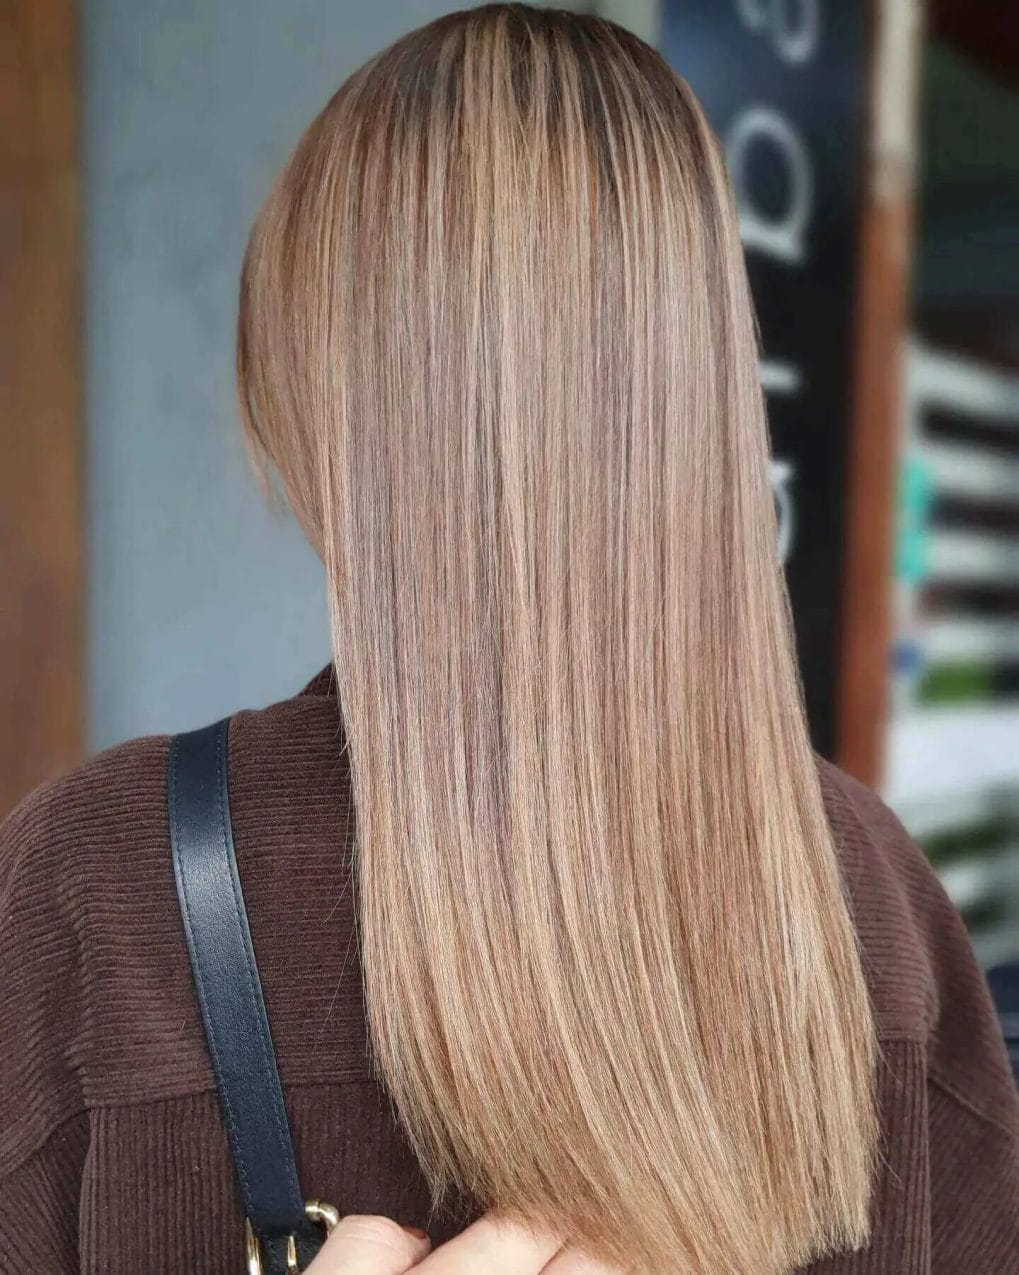 Honey and caramel balayage on light brown base, straight hair just below shoulders.